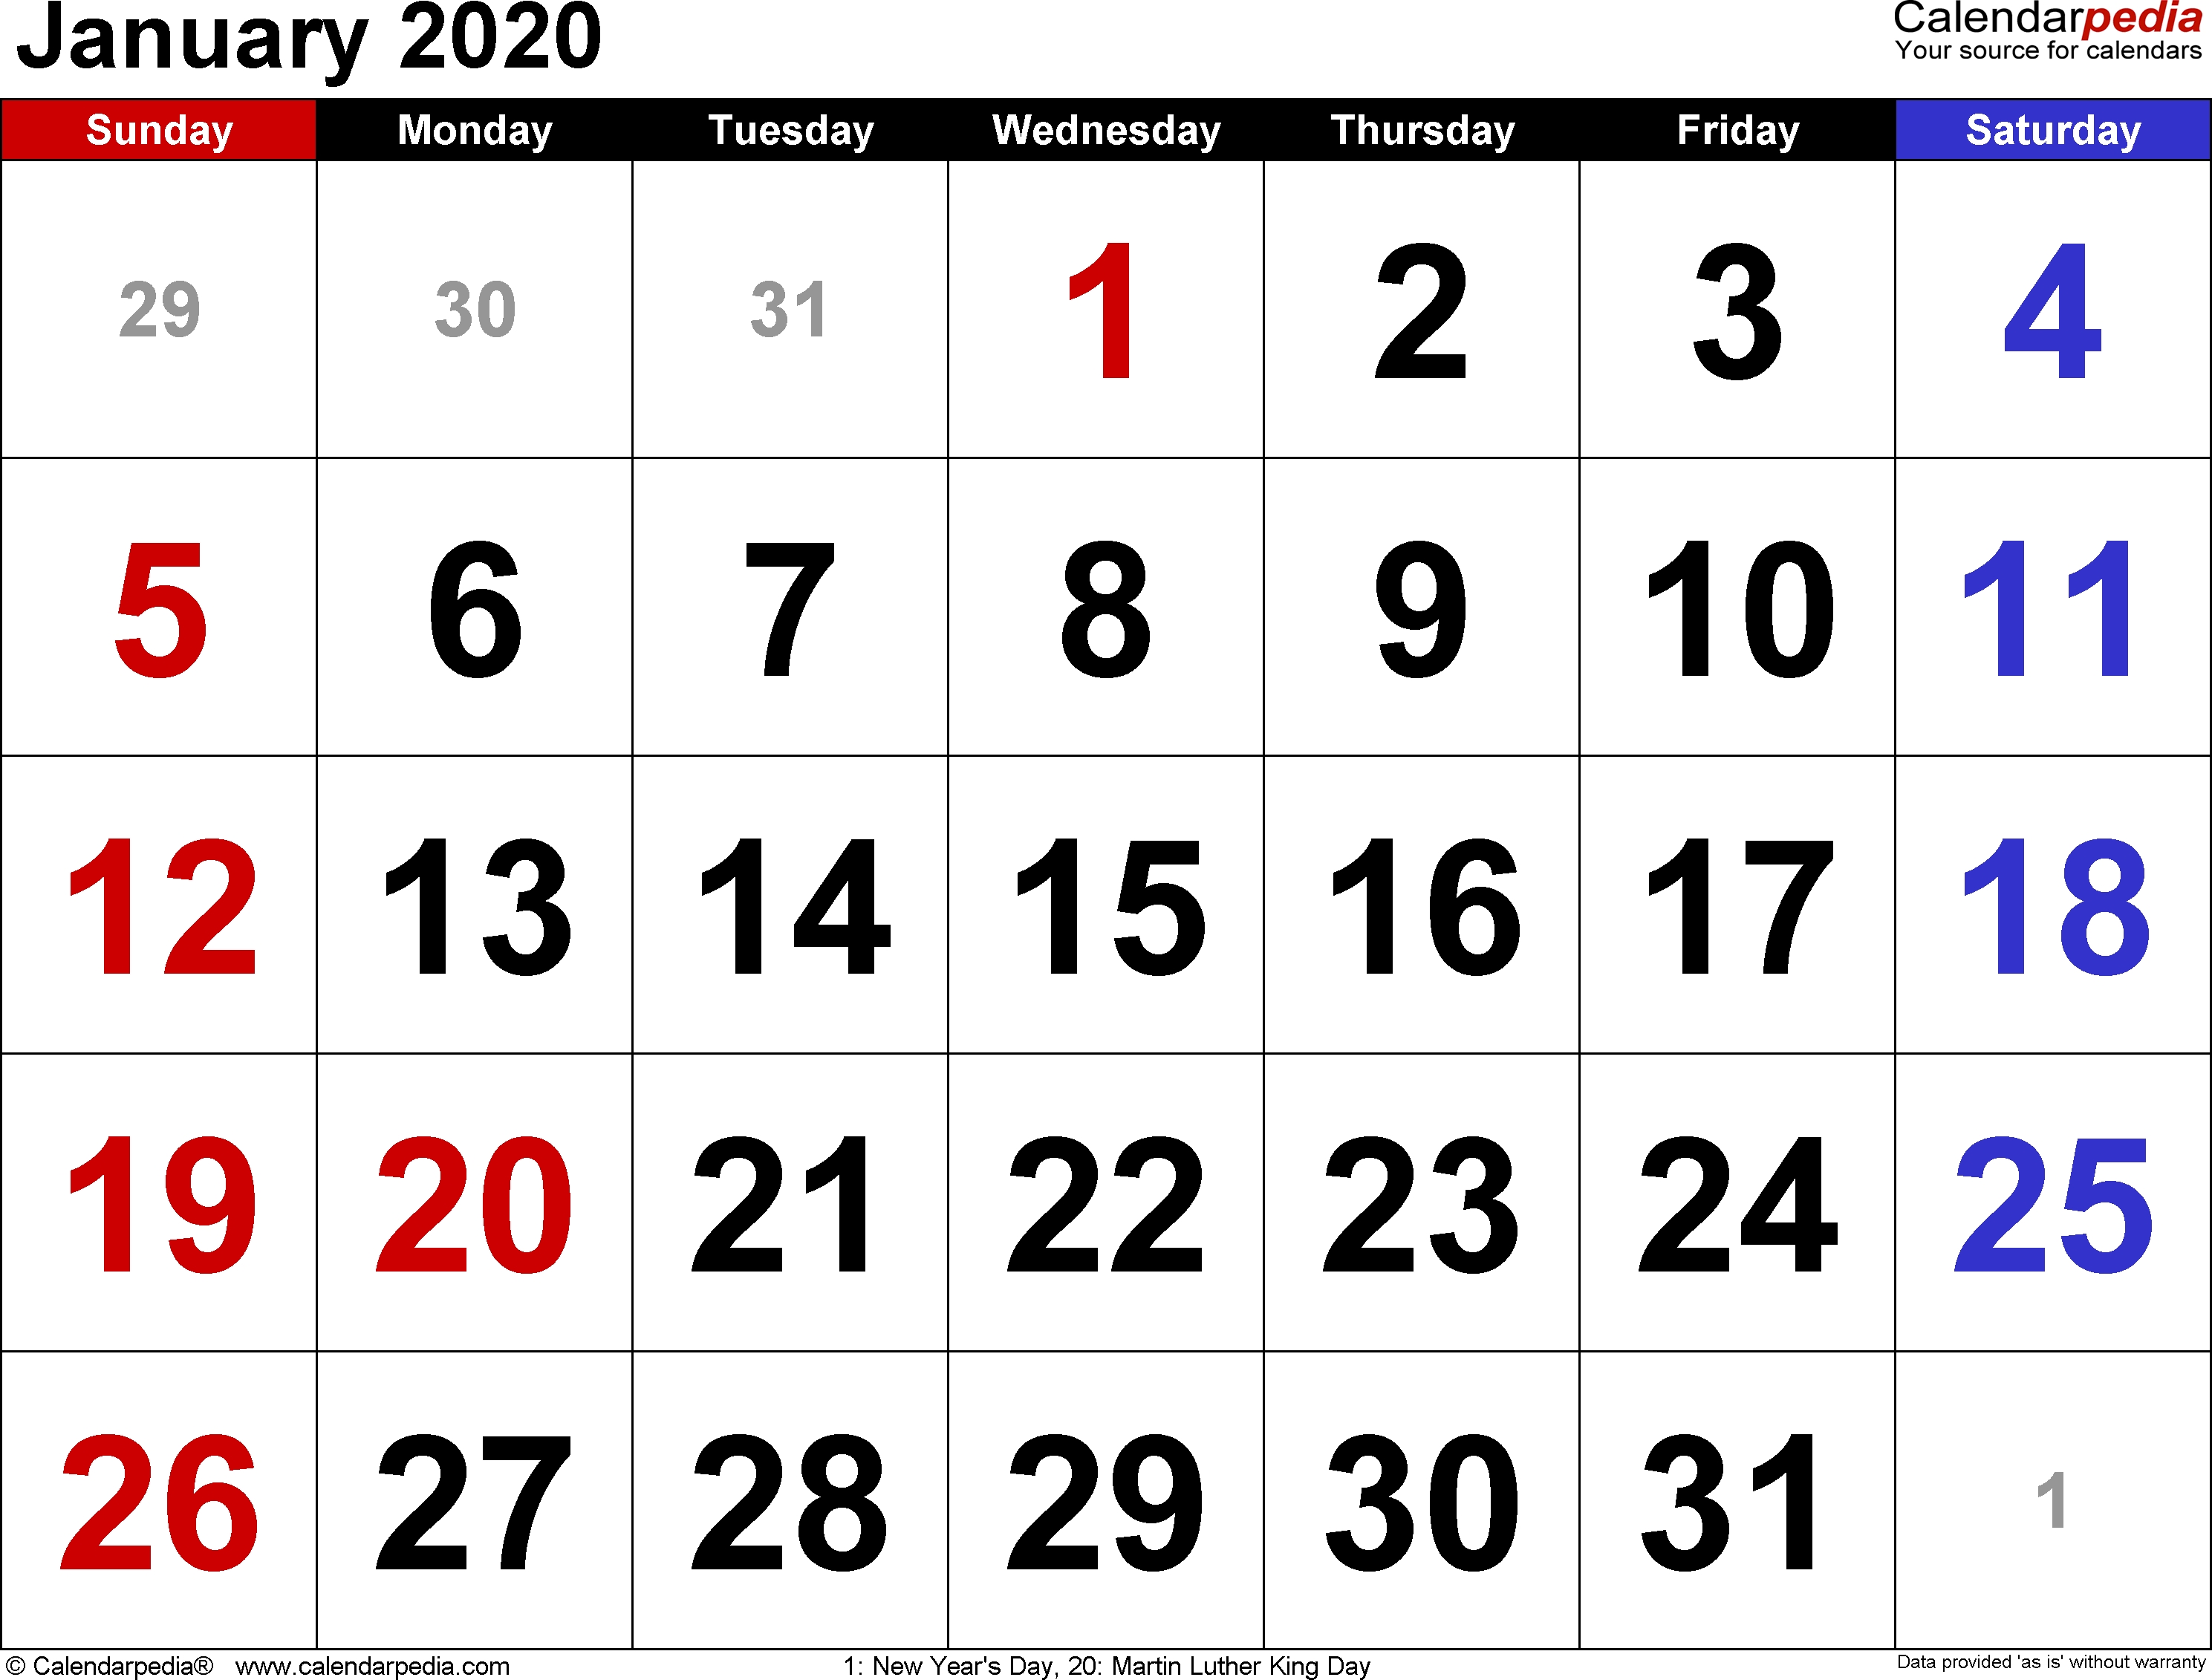 January 2020 Calendars For Word, Excel &amp; Pdf-January 2020 Calendar Of Events